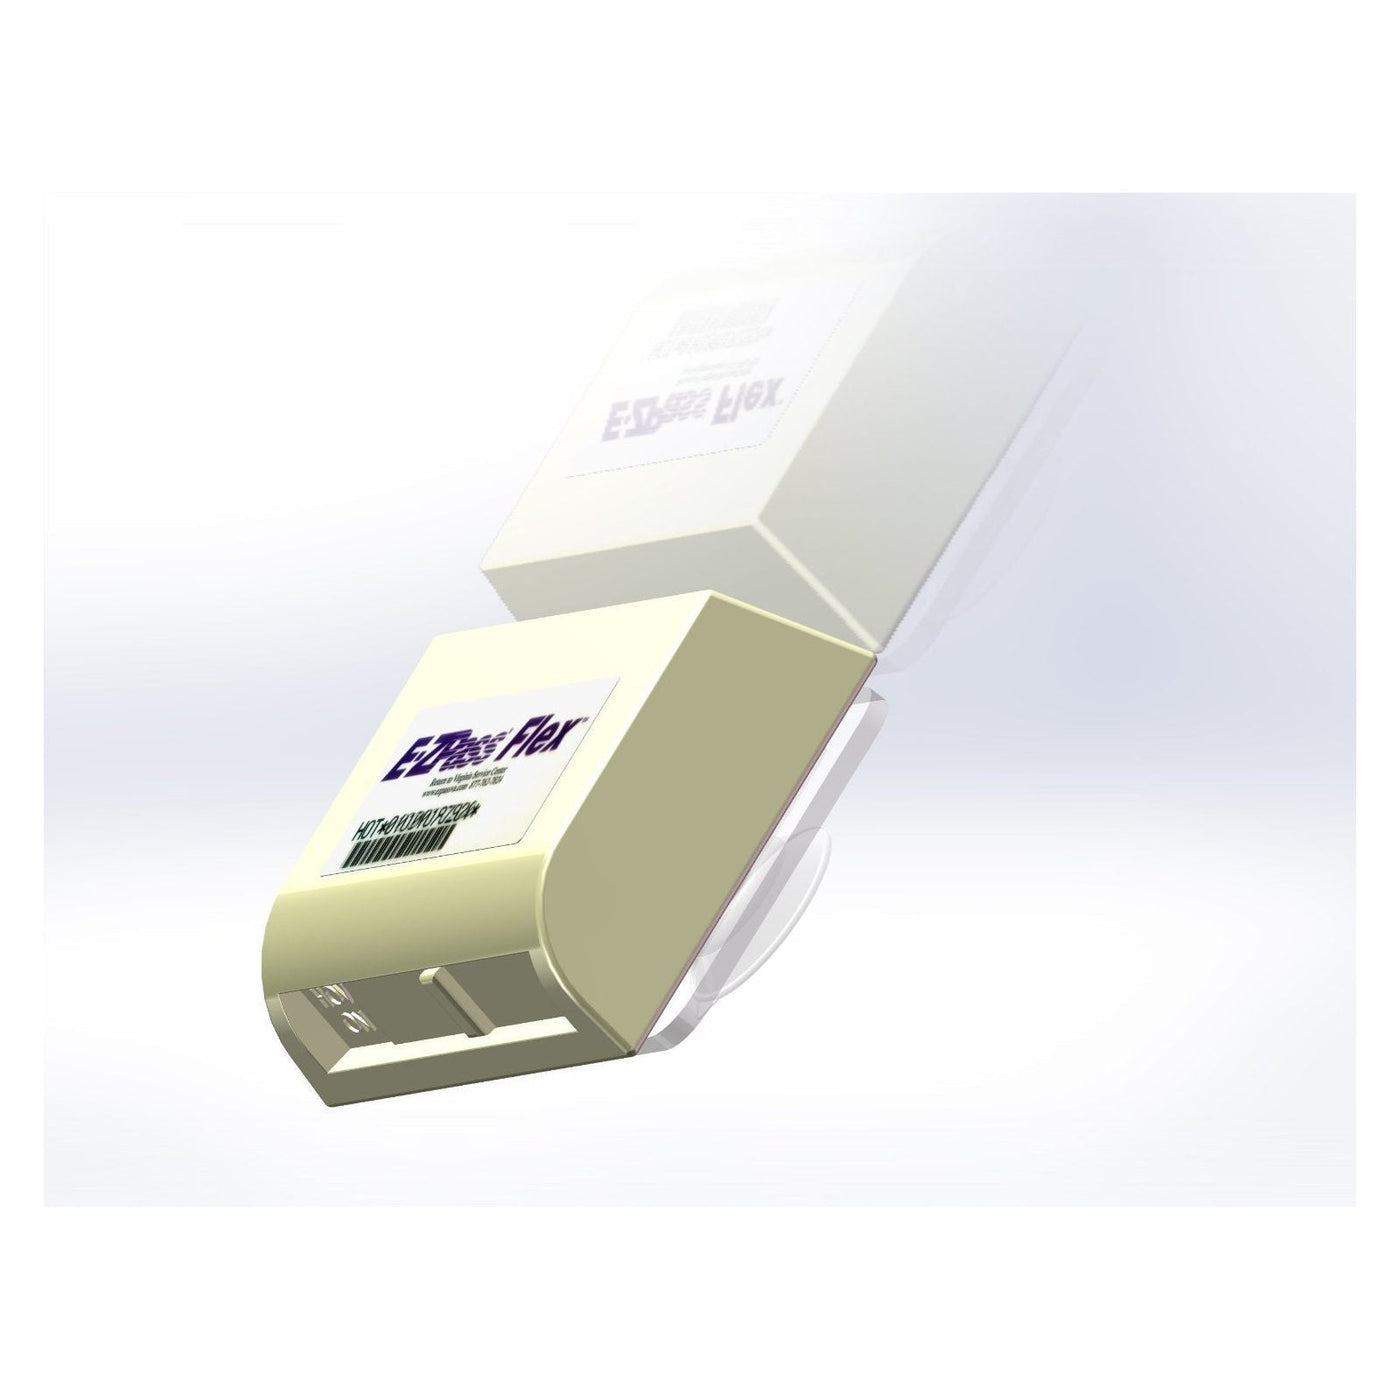 AAA Corporate Travel  JL Safety - EZ Pass-Port™ Unbreakable Toll Pass  Holder